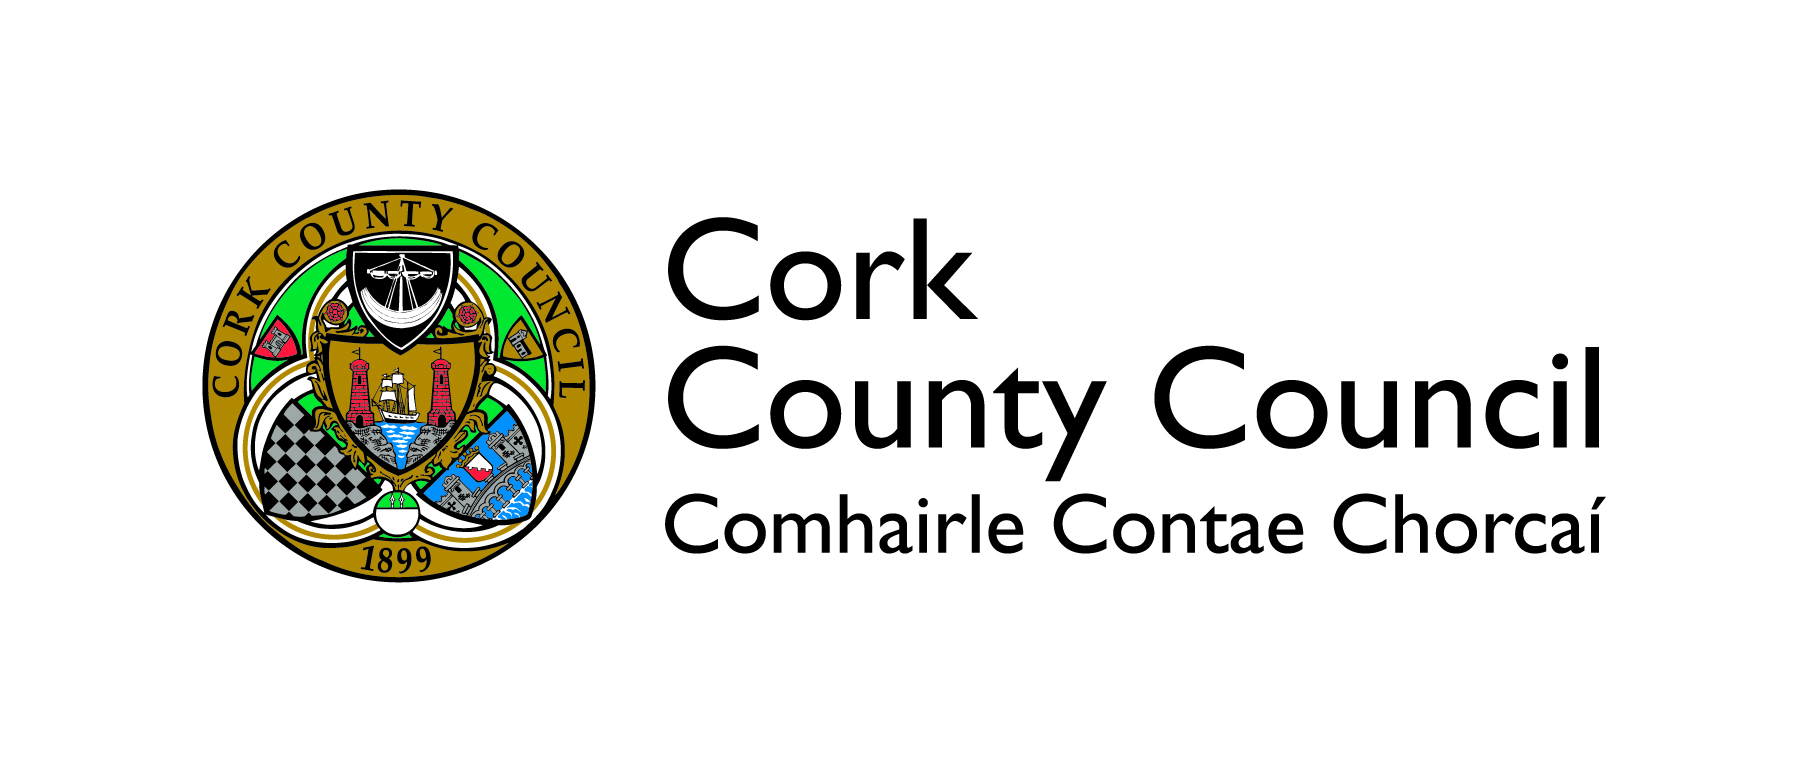 Cllr. O’ Shea welcomes increase in funding to Local & Regional Roads in Cork for 2018